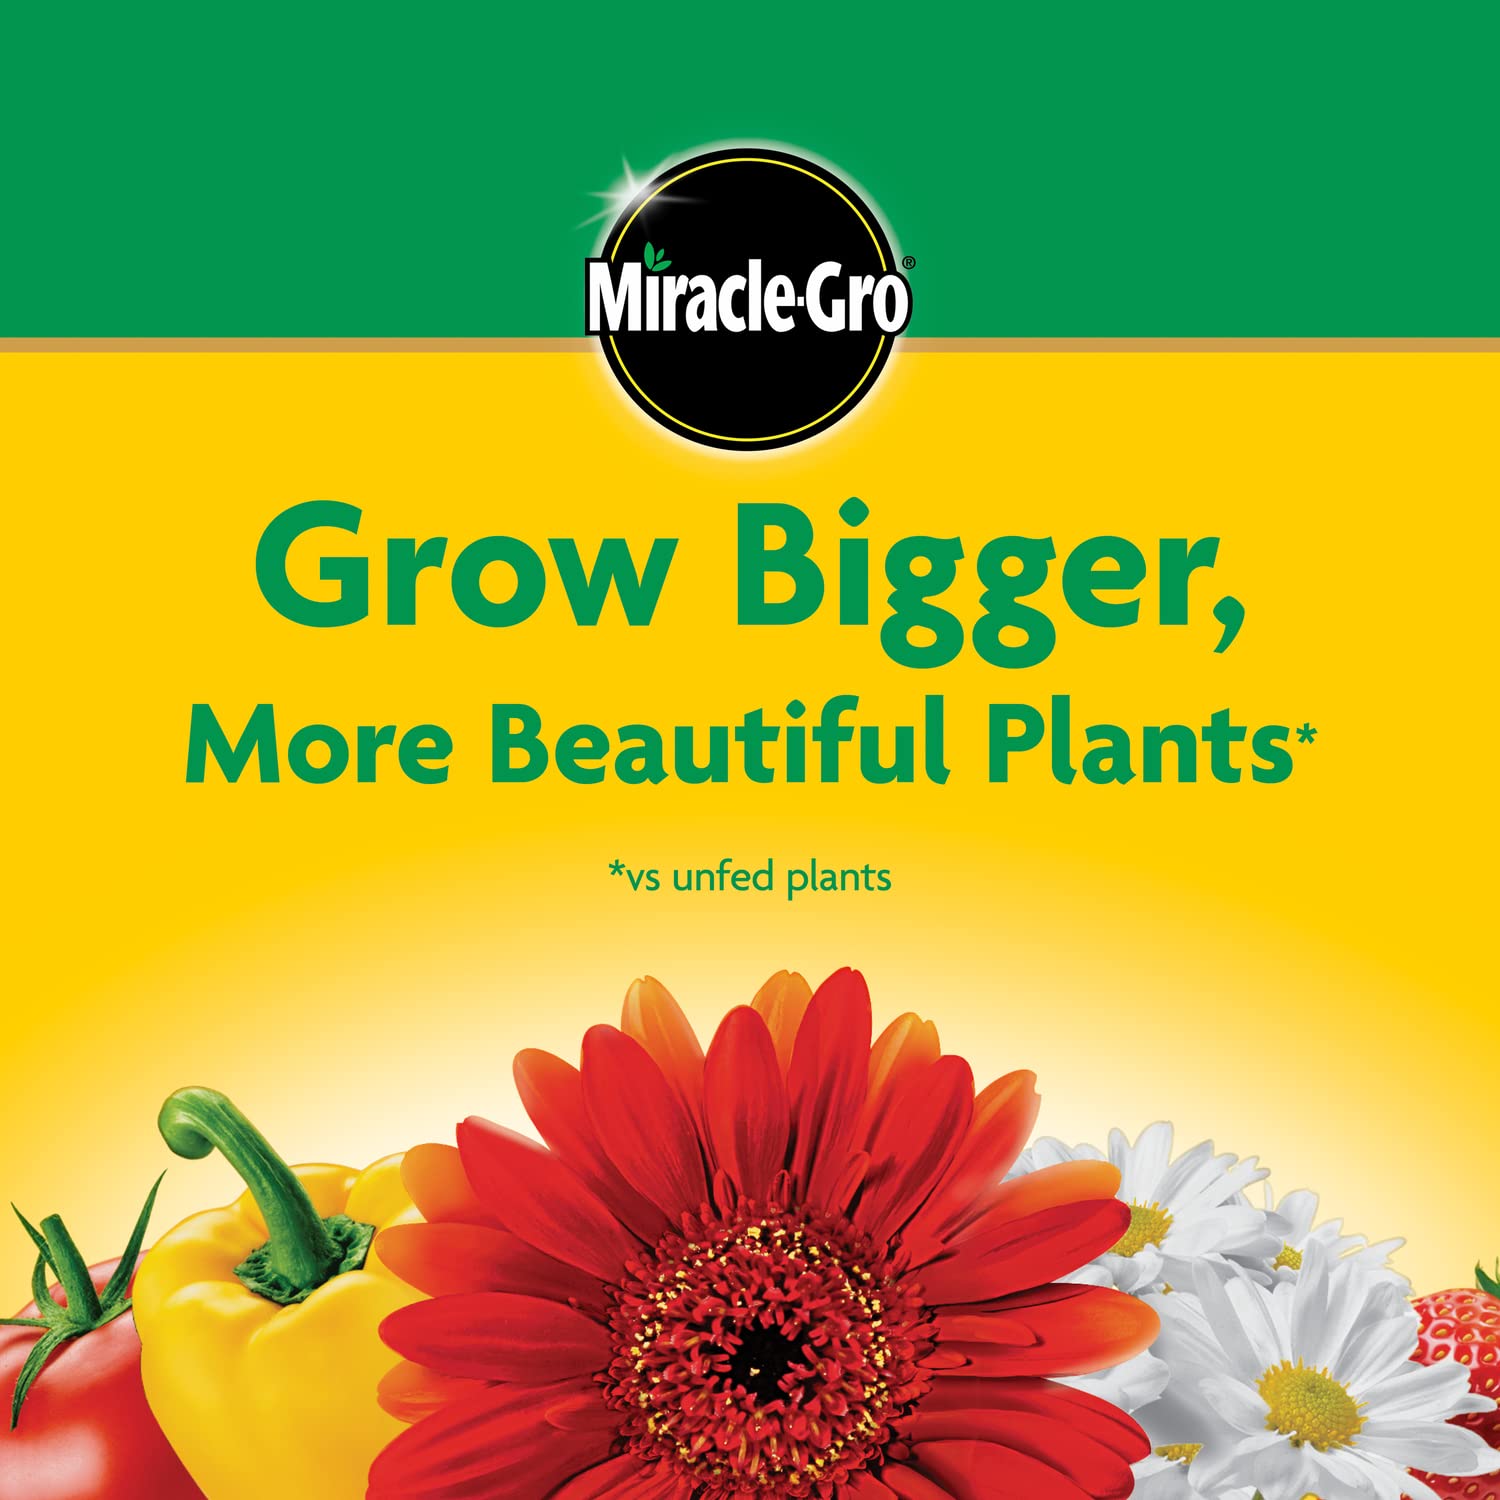 Miracle-Gro Water Soluble All Purpose Plant Food, 24-8-16, Instantly Fertilizes Plants, Waterproof Bag - 5.5 lb., 2-Pack